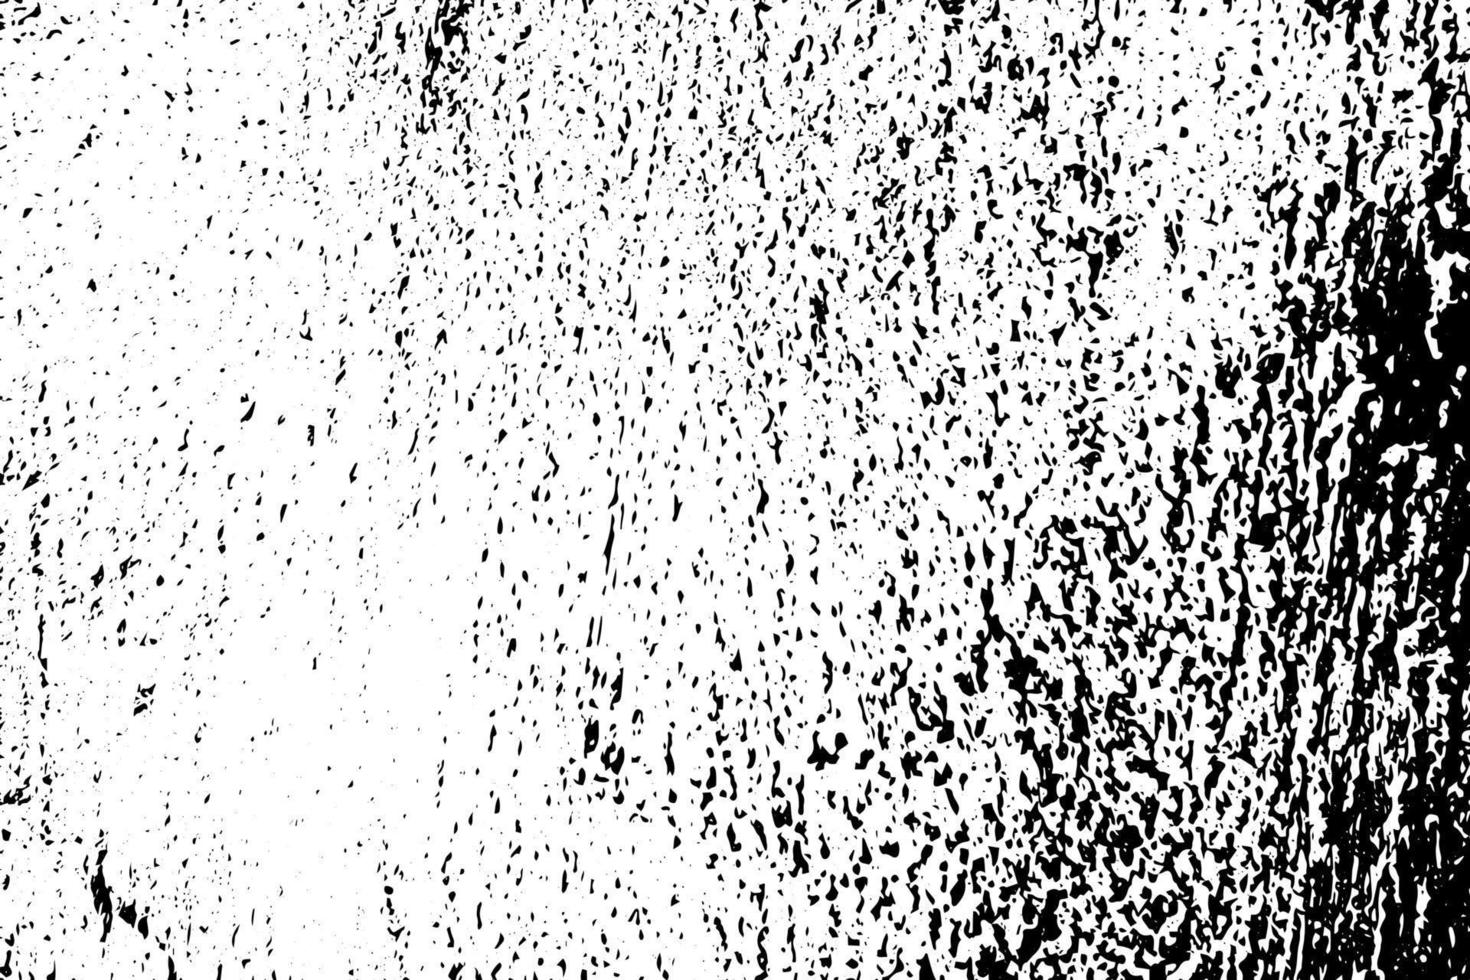 Abstract dust particle and dust grain texture on white background vector